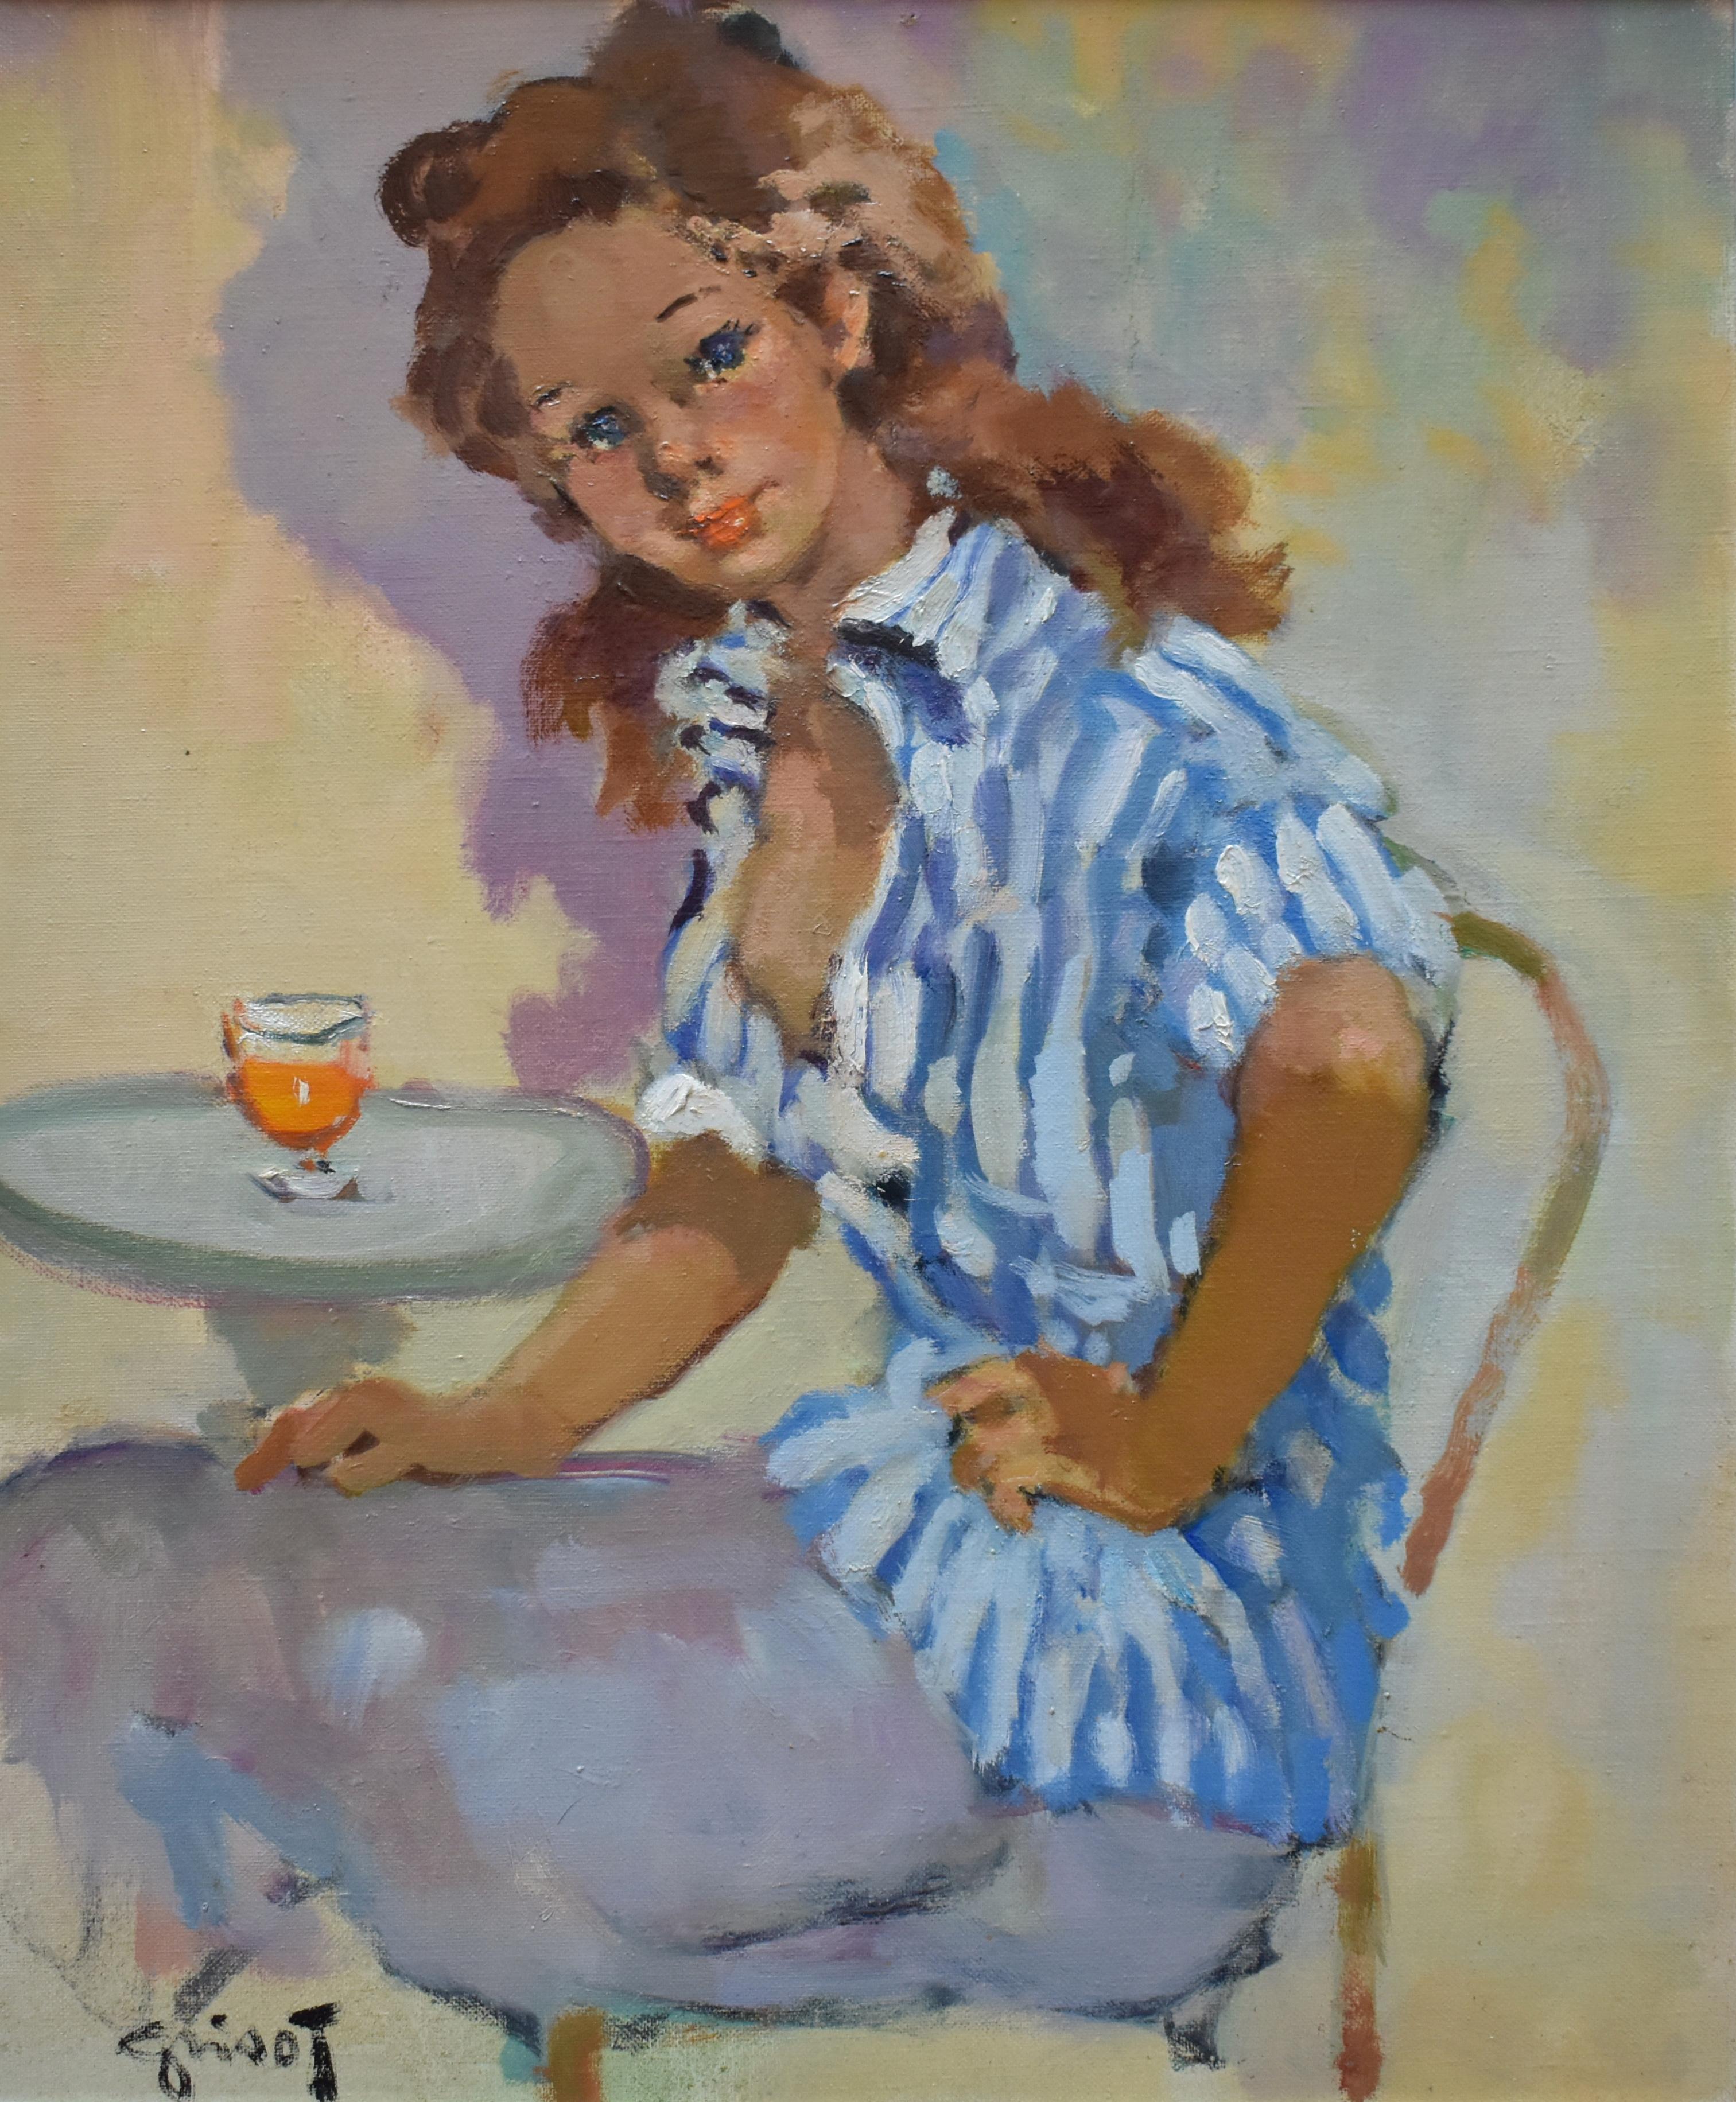 PIERRE GRISOT, (1911 - 1995) “At The Cafe” Post Impressionist - Painting by Pierre Grisot